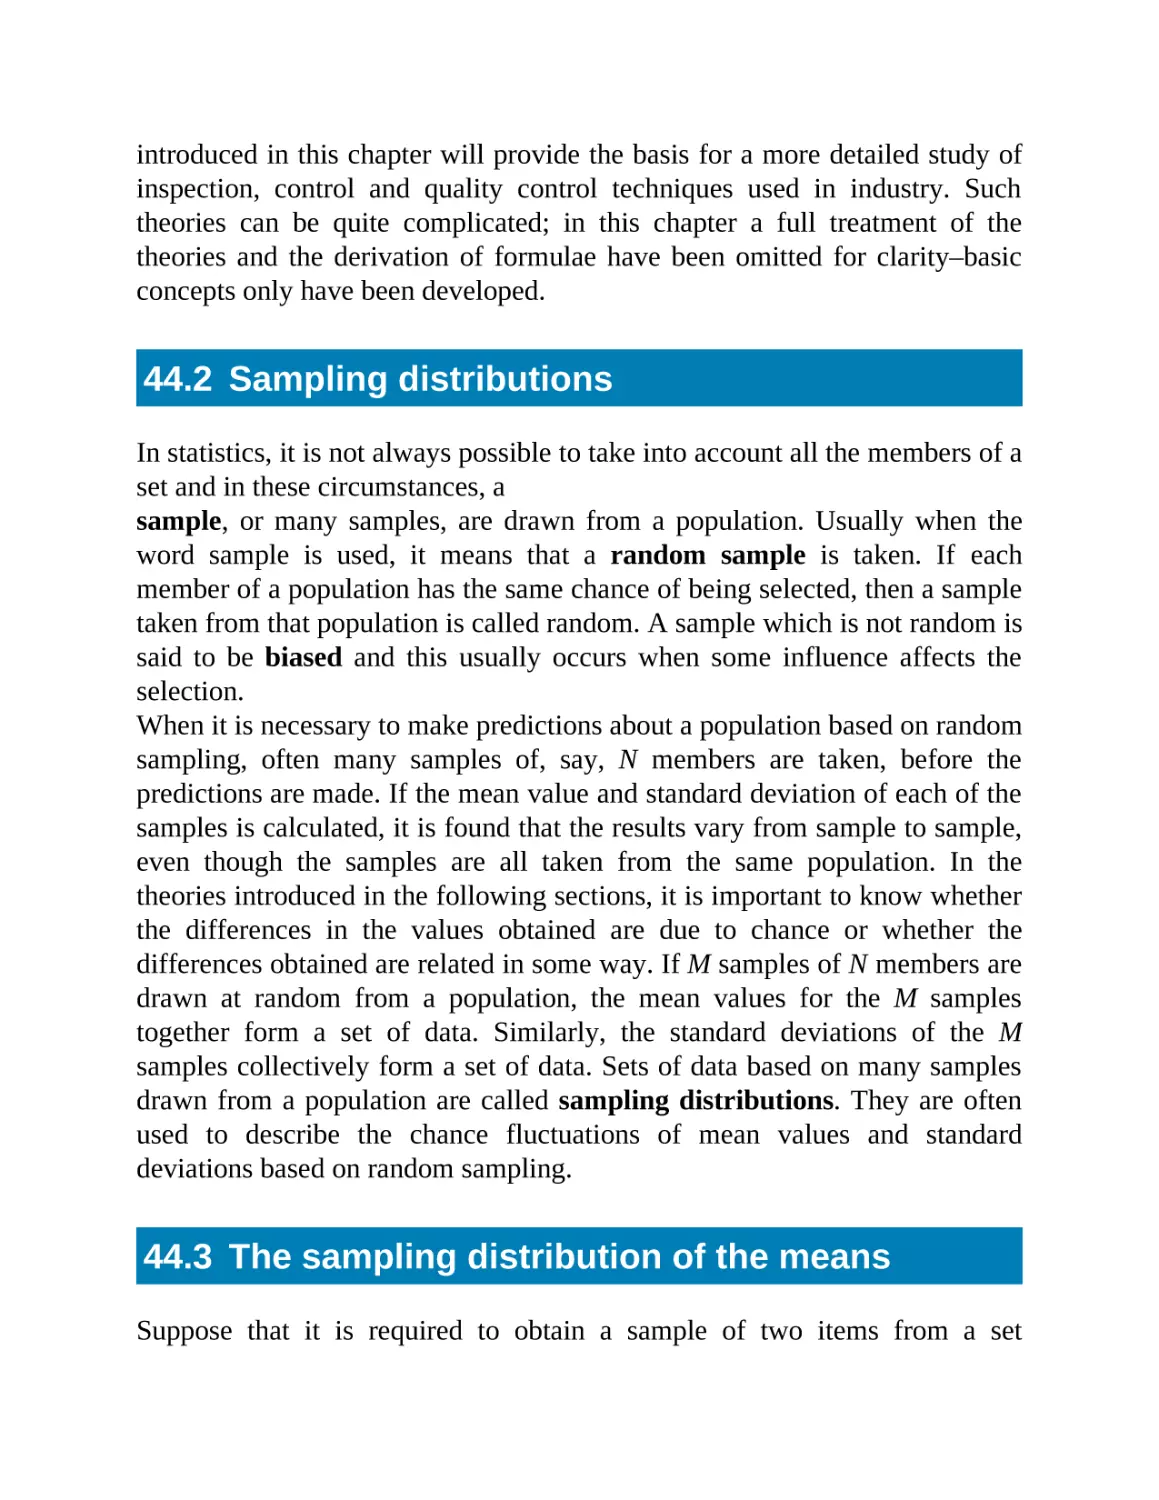 44.2 Sampling distributions
44.3 The sampling distribution of the means